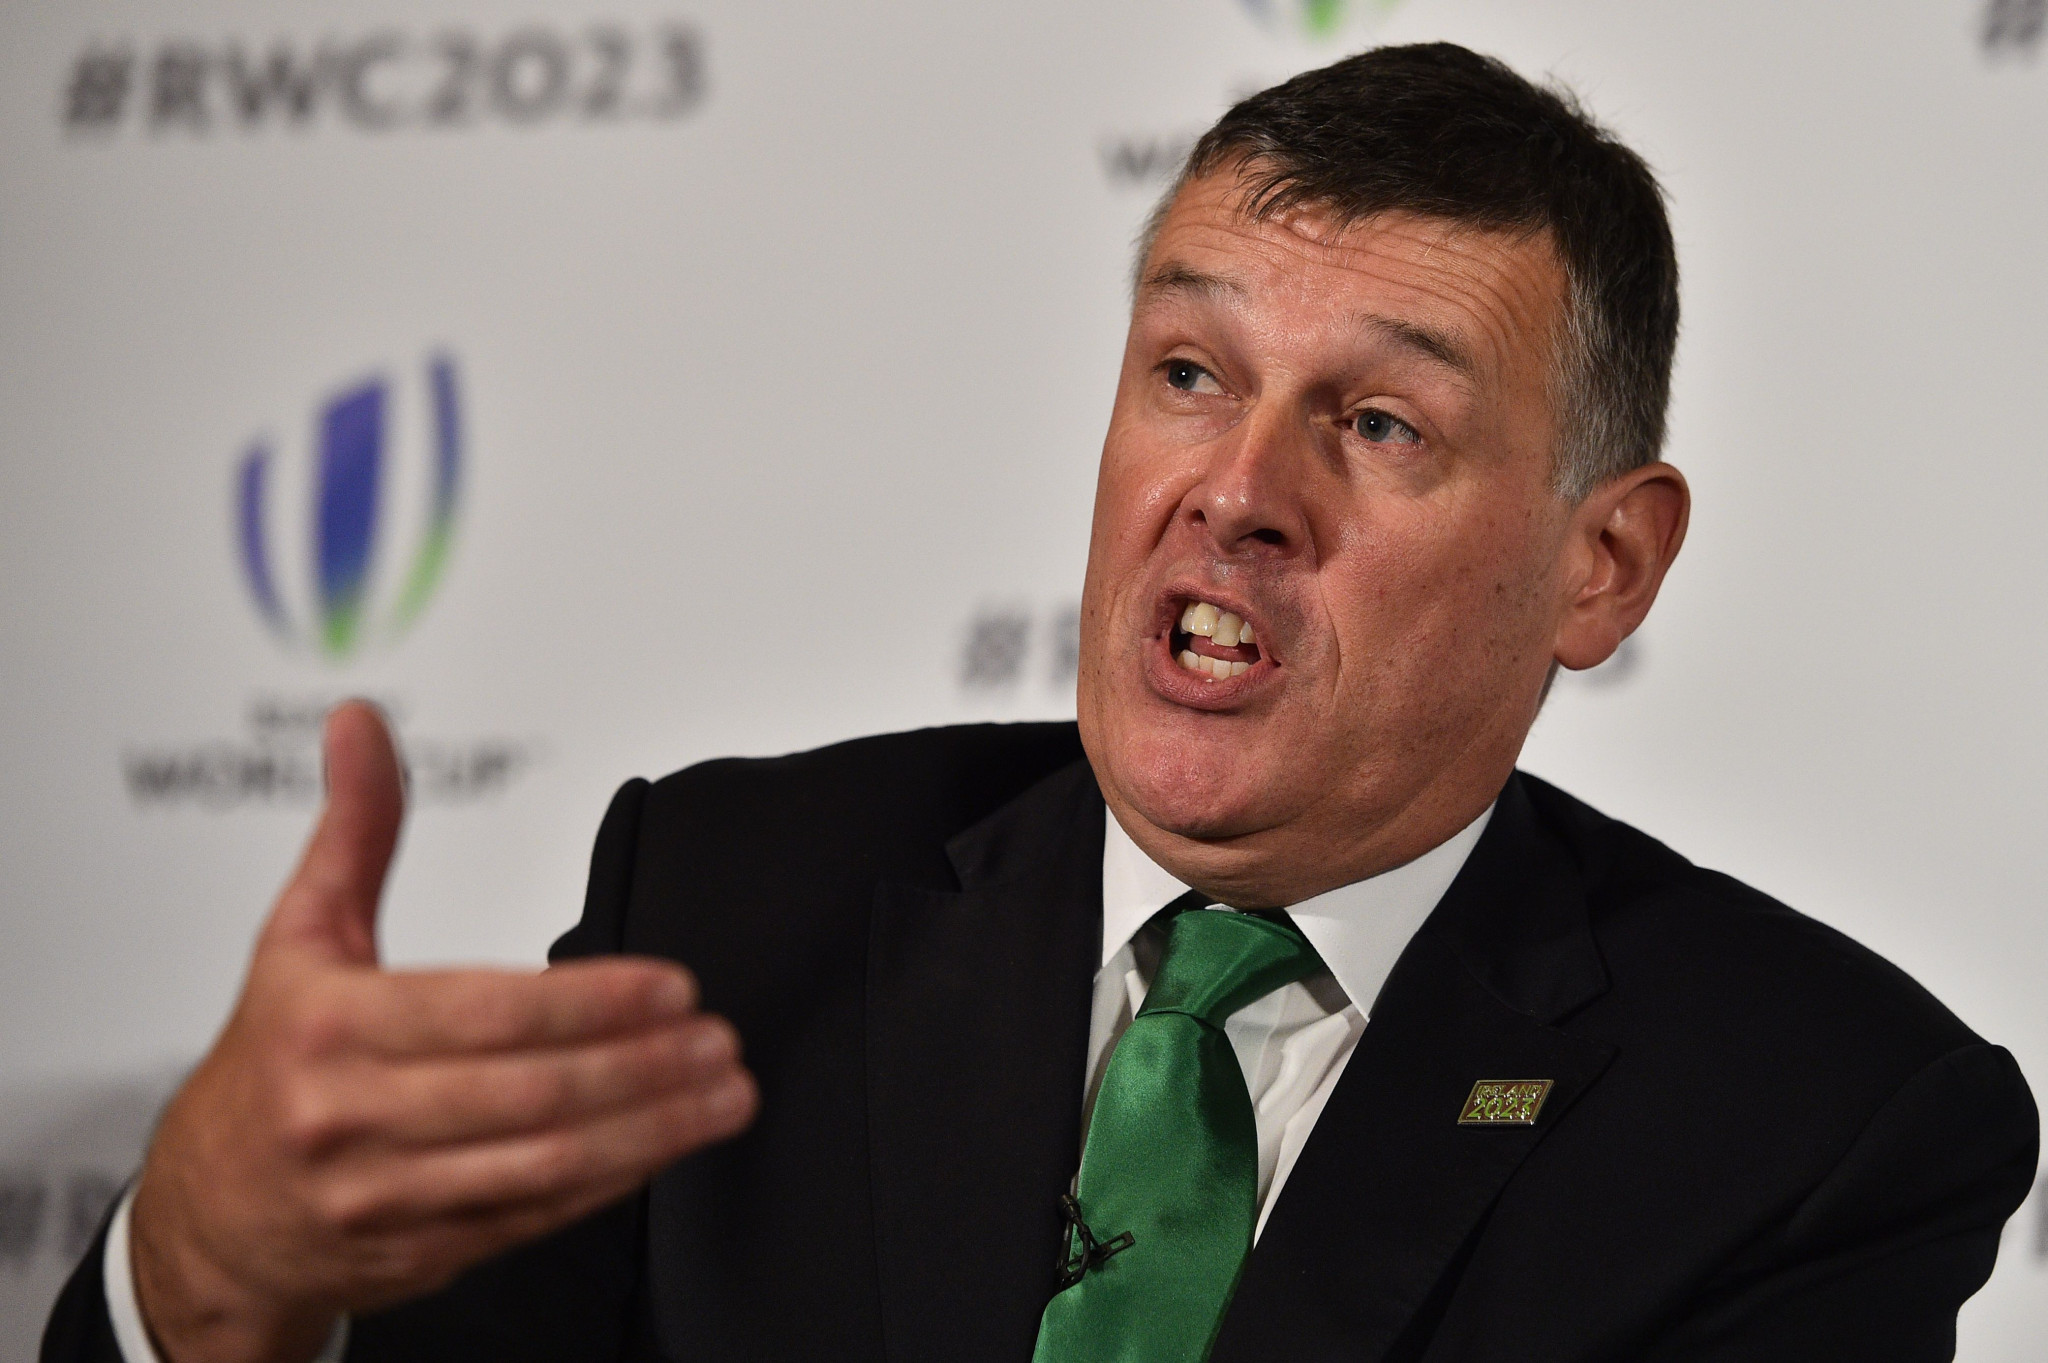 An official complaint regarding the 2023 Rugby World Cup evaluation report has been submitted by Ireland ©Getty Images